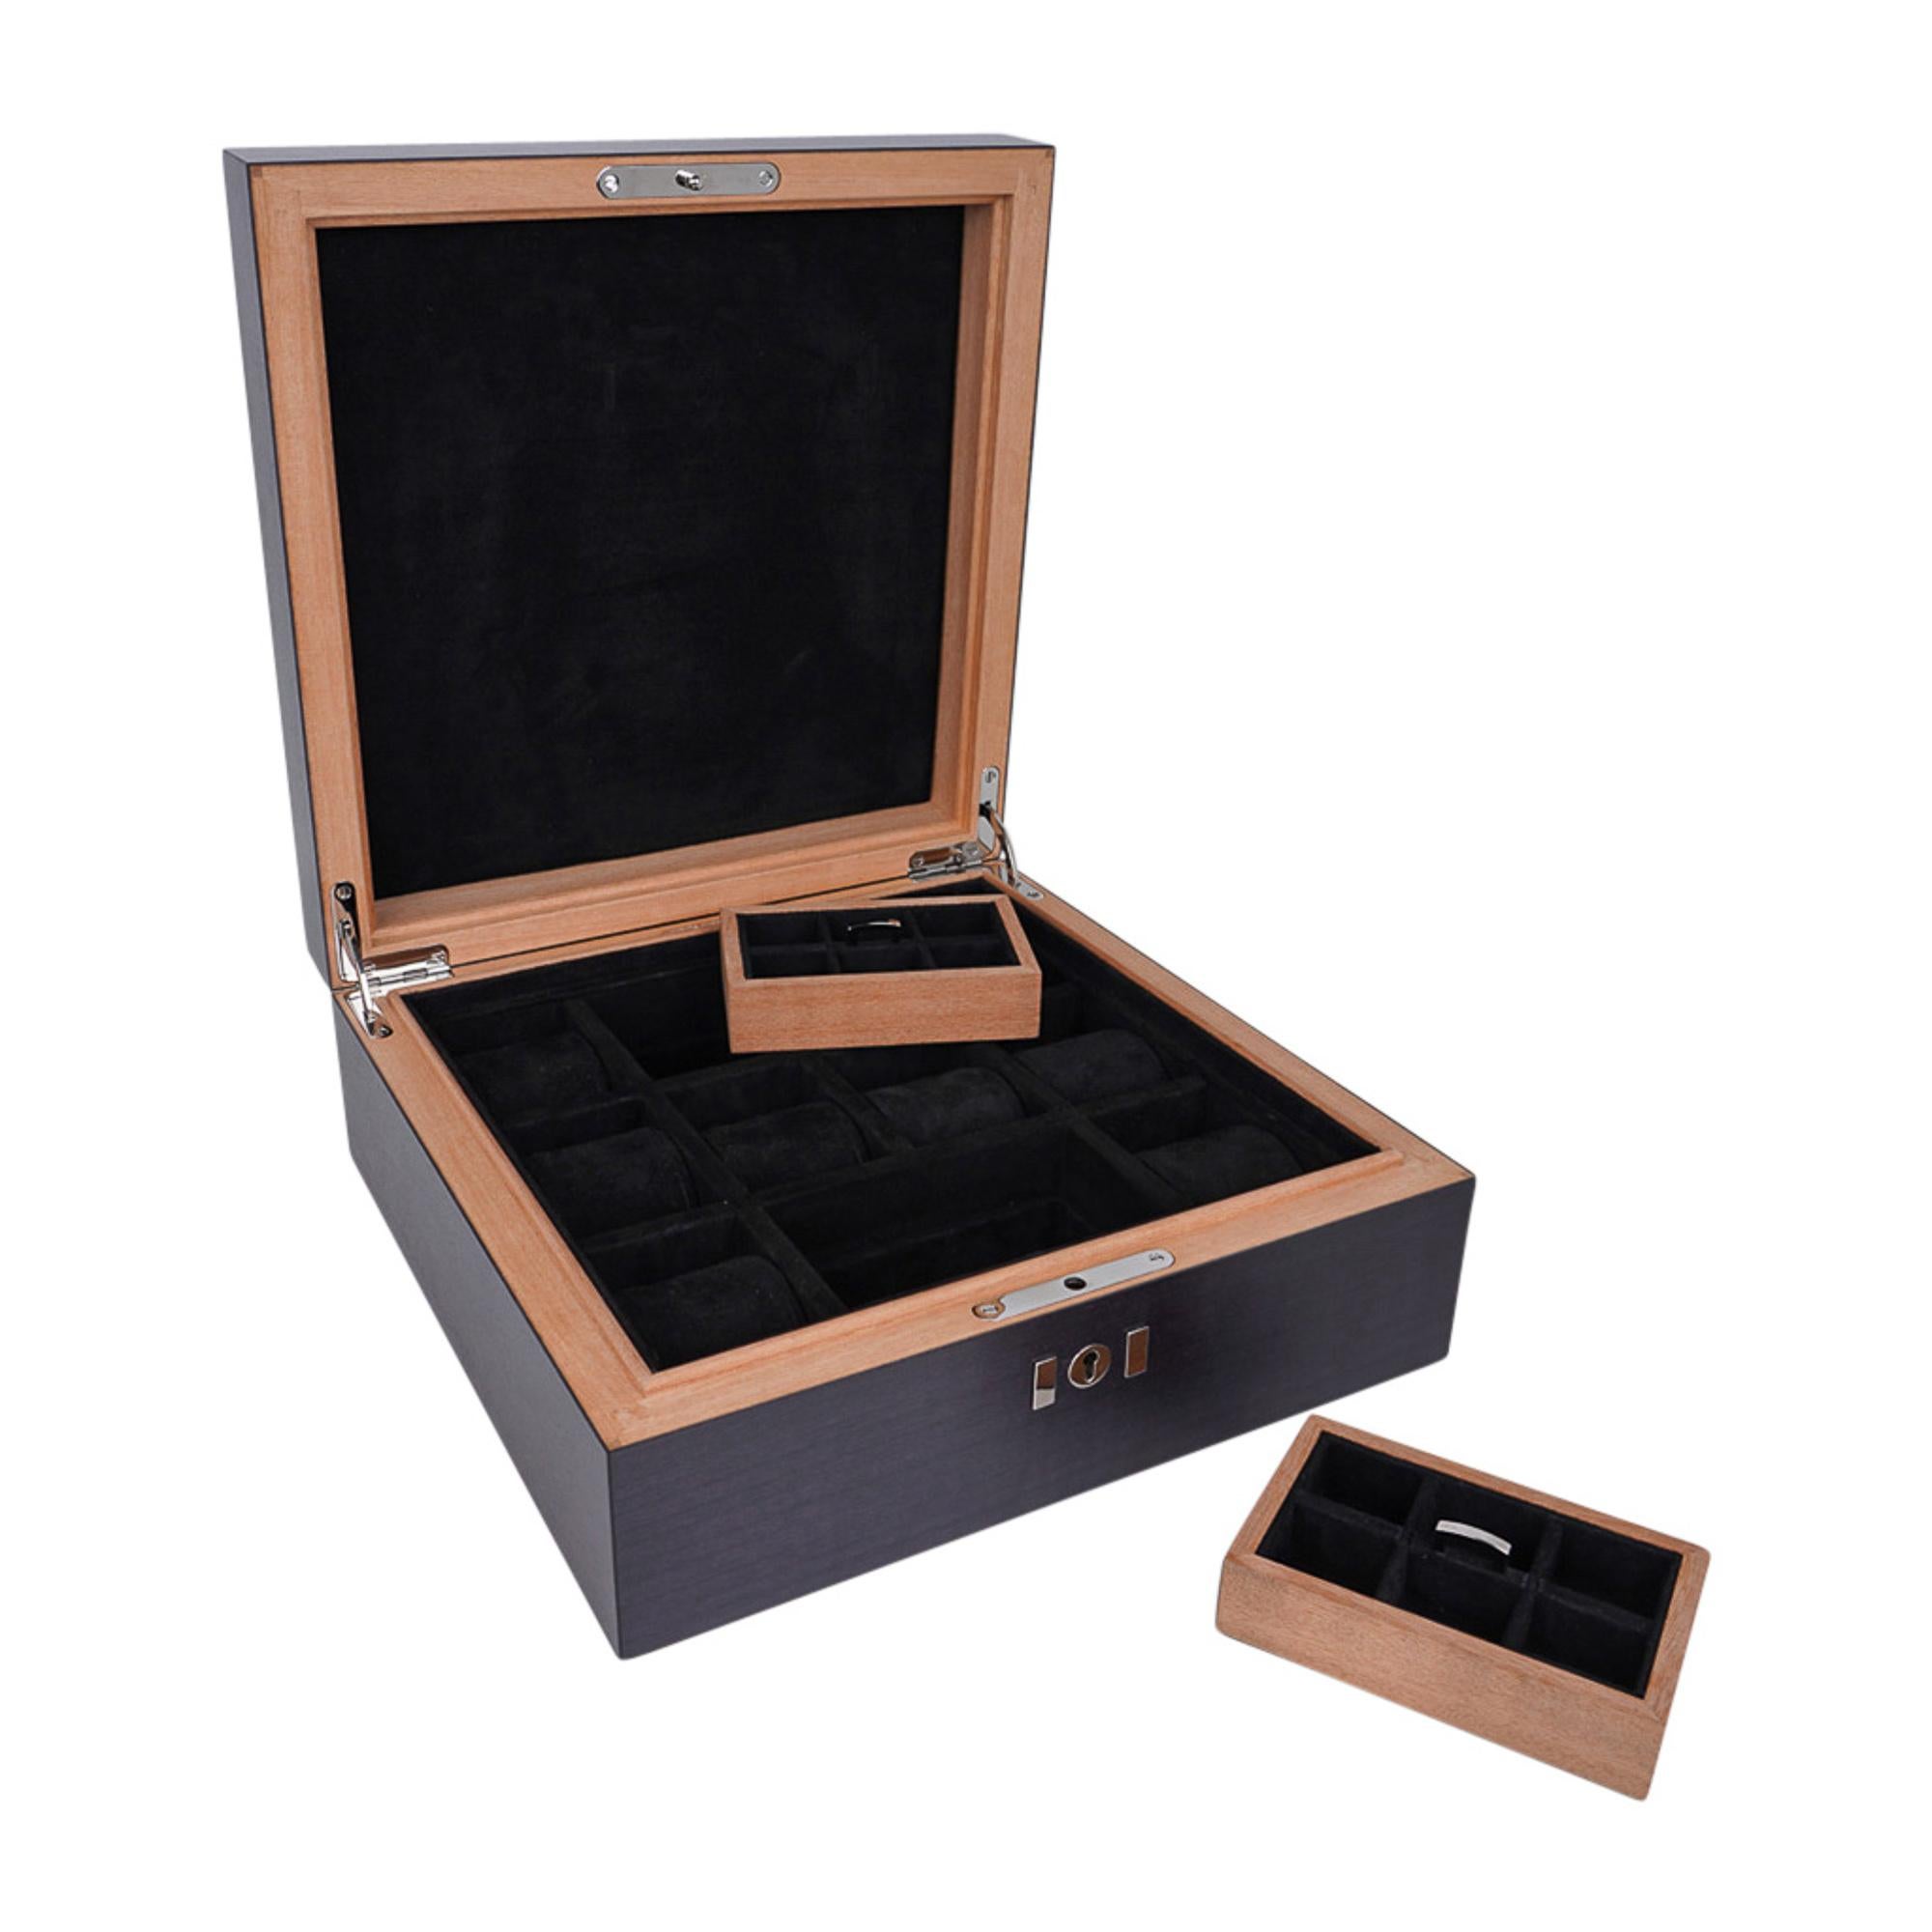 Mightychic offers an Hermes one of one Watch Box featured with matte Alligator
Vert Titien lid.
Rich Sycamore wood case lined in rich brown suede.
Holds eleven (11) watches.
Two removable trays - each have six (6) for rings or cuff links.
A